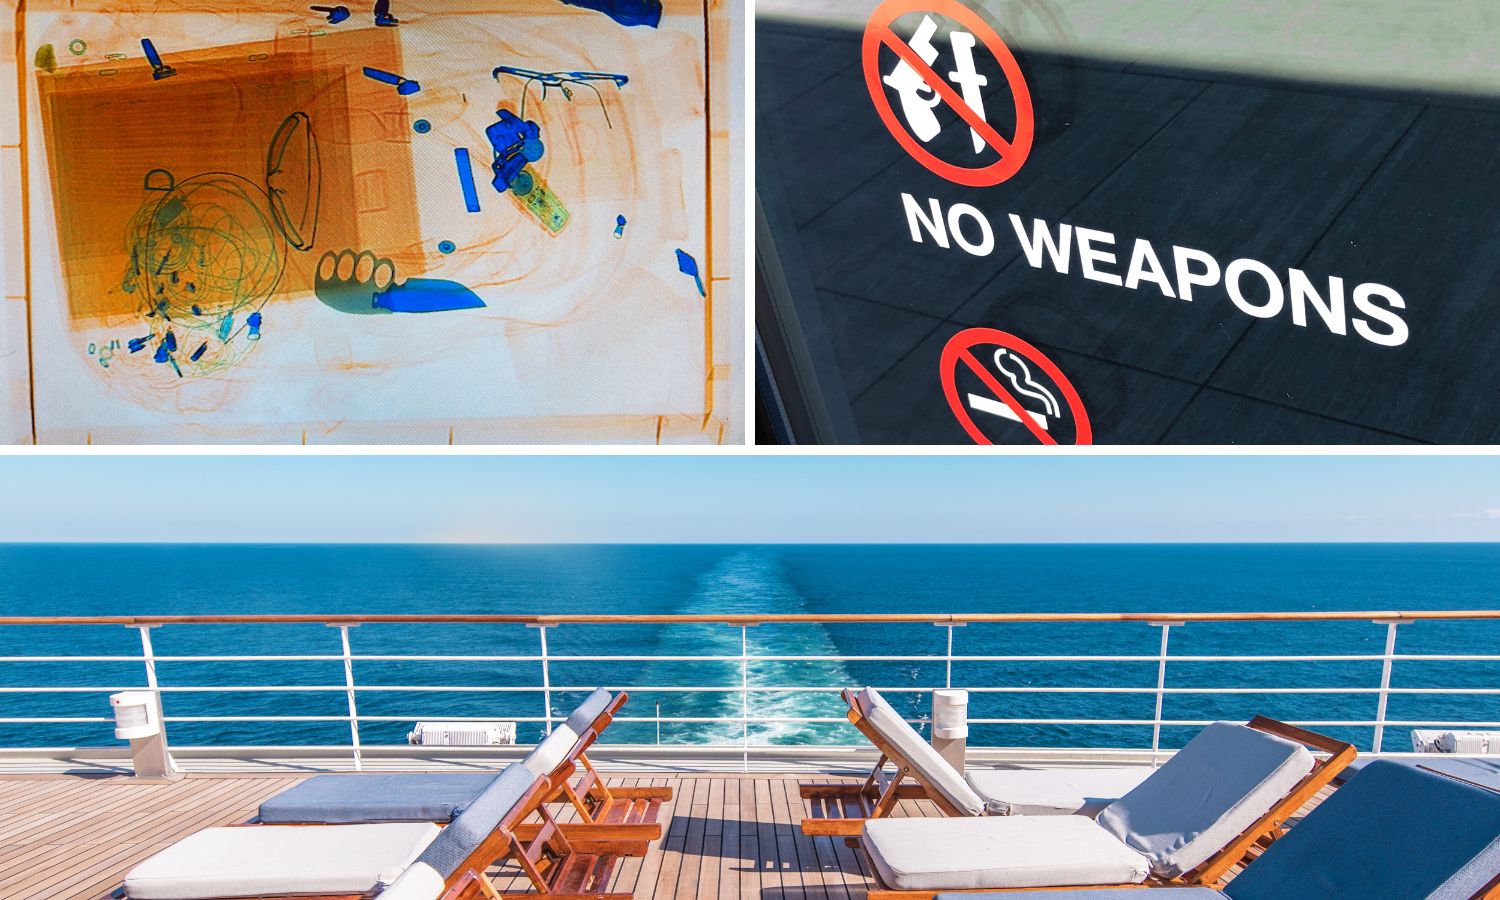 No weapons sign for cruise ship